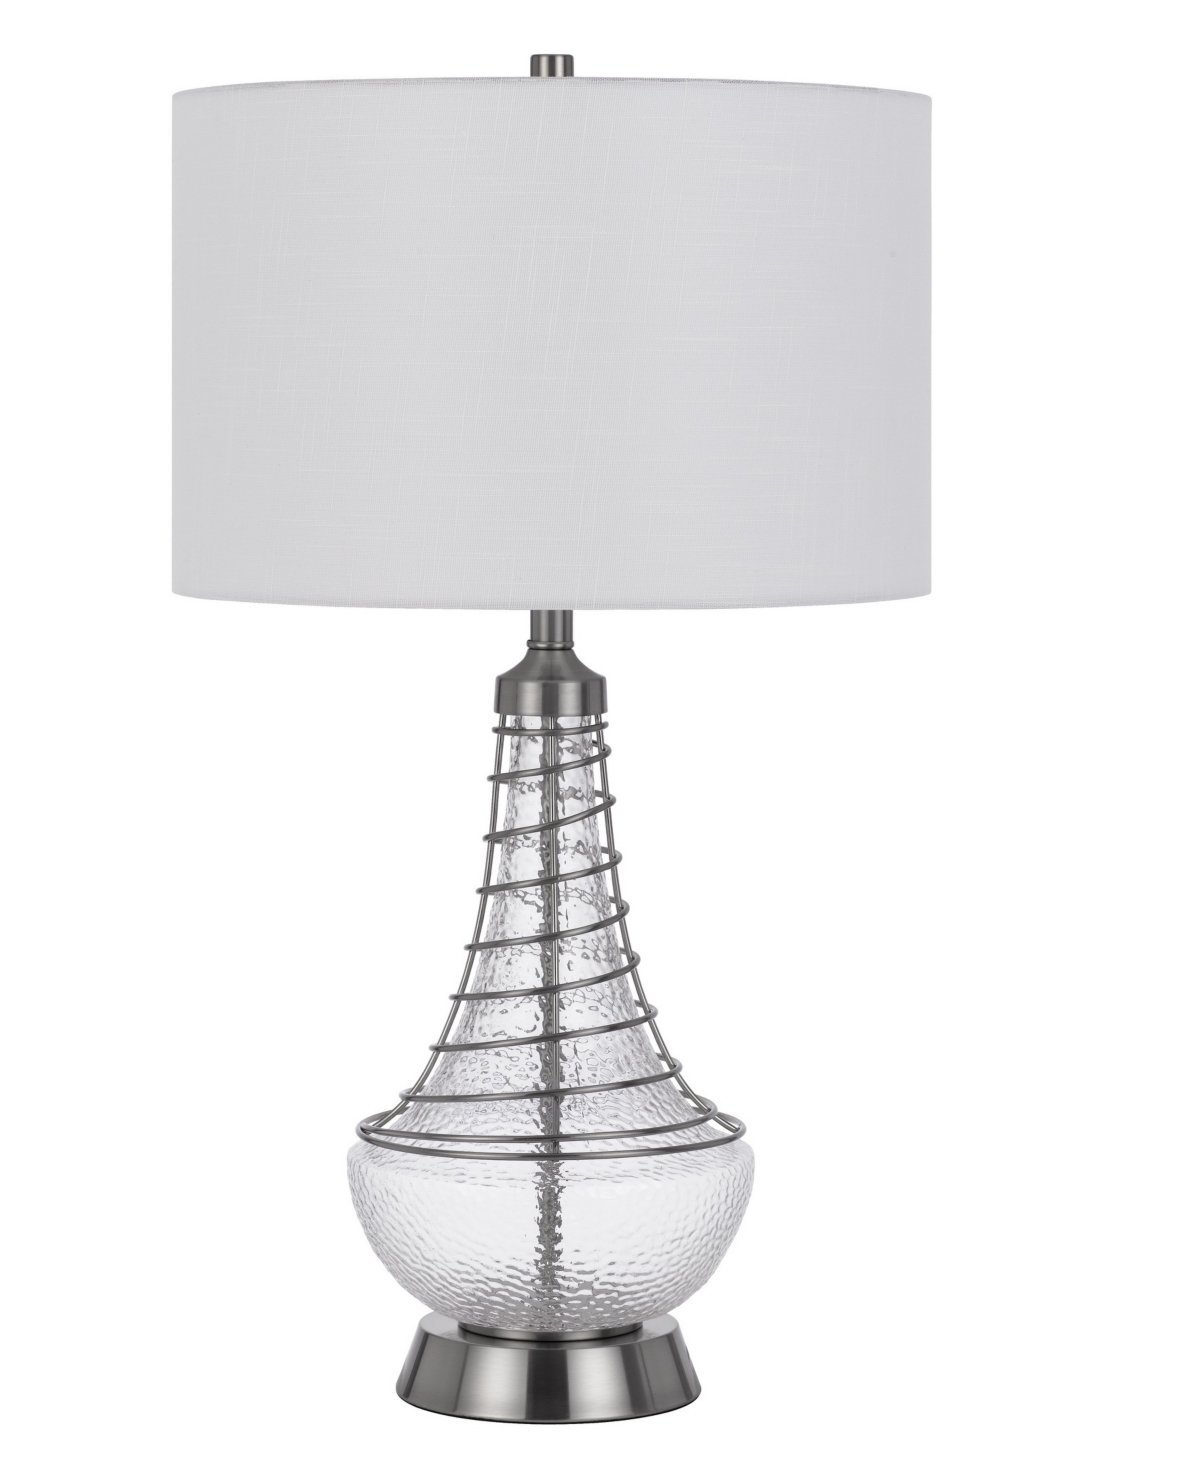 Cal Lighting Baraboo 29.5" Height Glass Table Lamp In Brushed Steel,silver